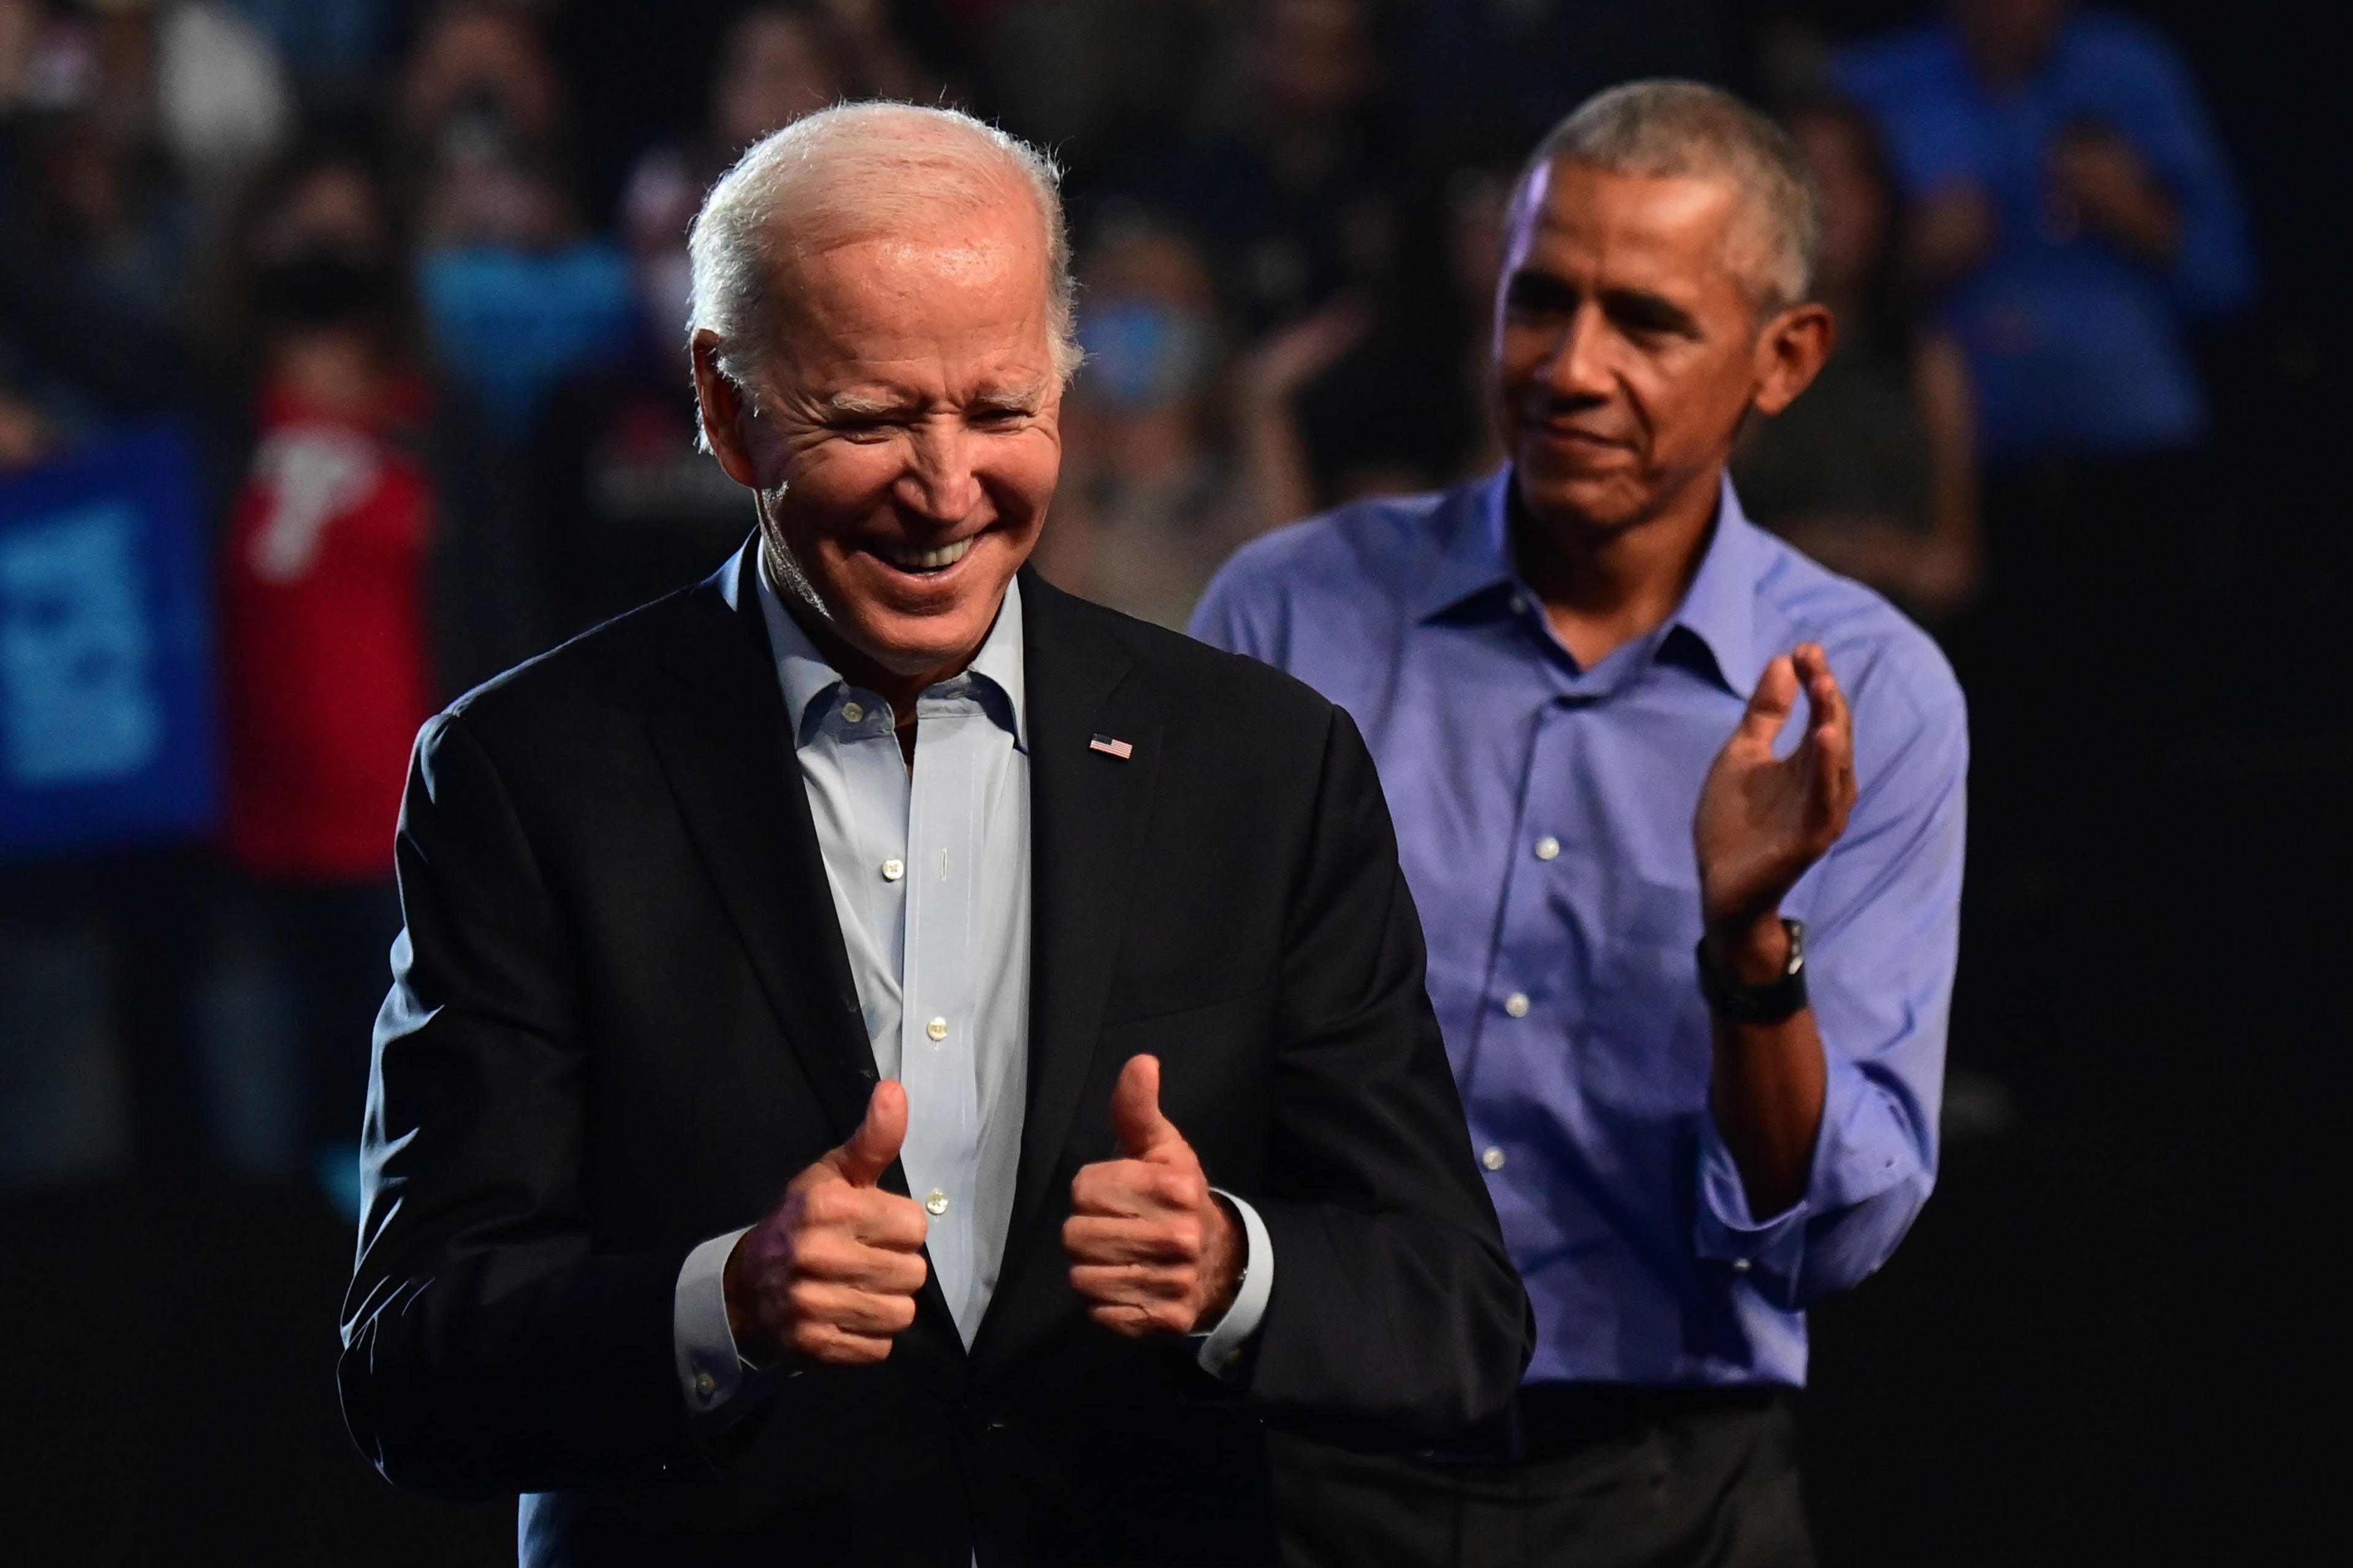 Joe Biden and Barack Obama pictured on November 5, 2022 in Philadelphia, Pennsylvania. Obama has privately raised concerns about Biden ’s path to re-election after his shaky debate performance, according to a new report